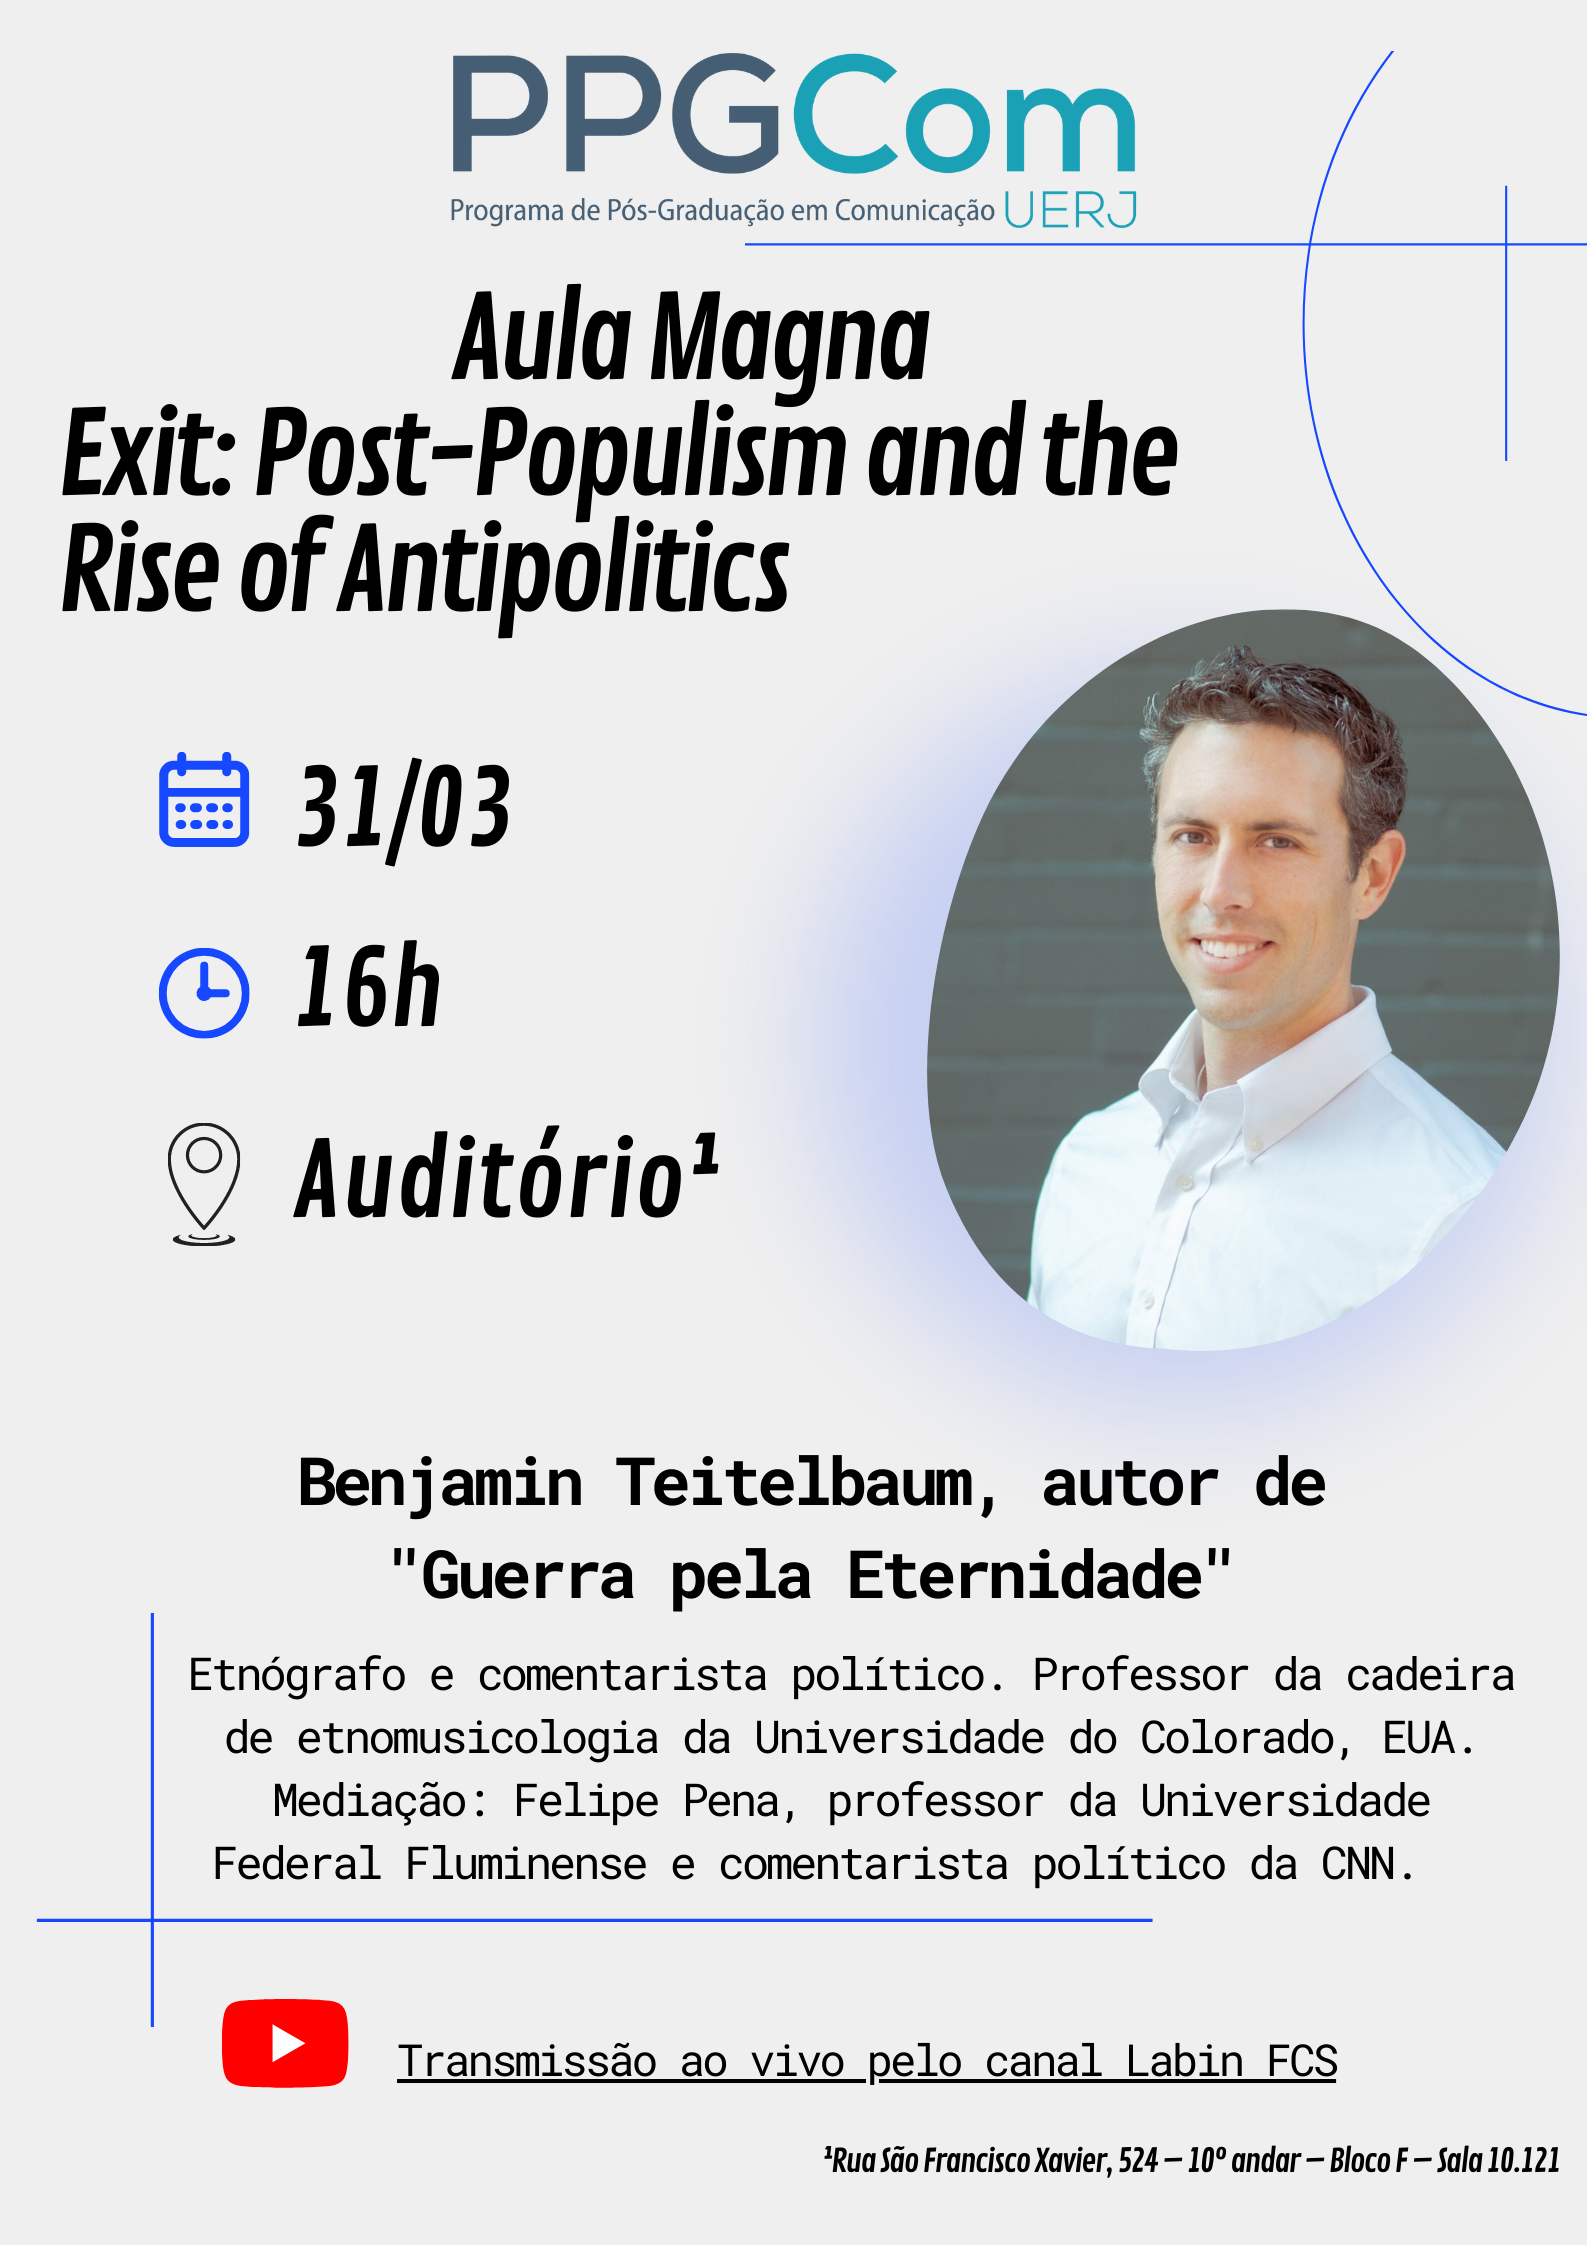 Aula Magna Exit Post-Populism and the Rise of Antipolitics (1)